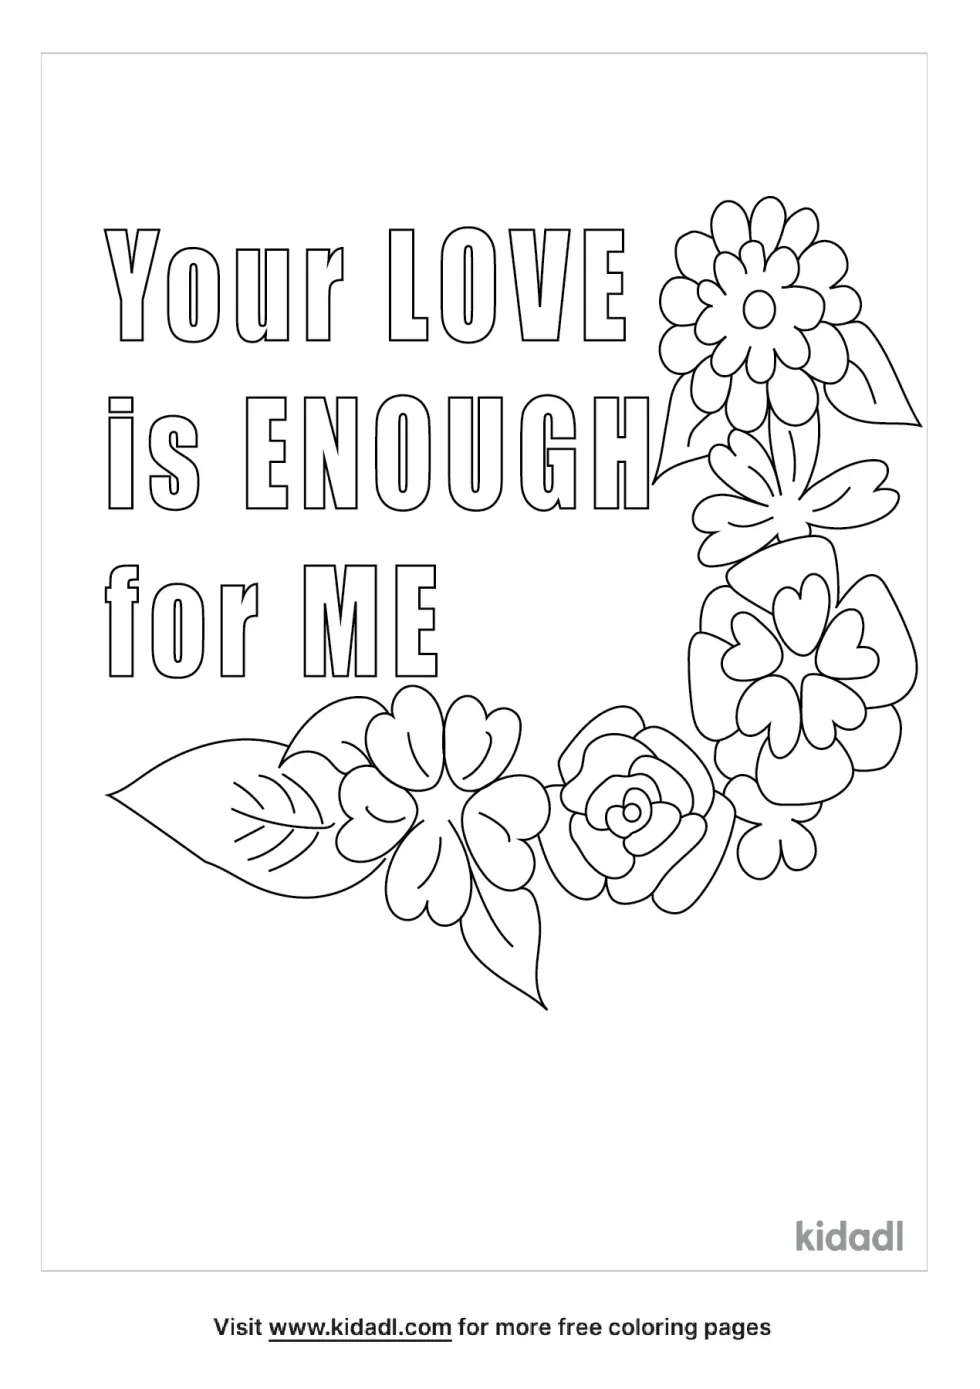 Your Love Is Enough For Me